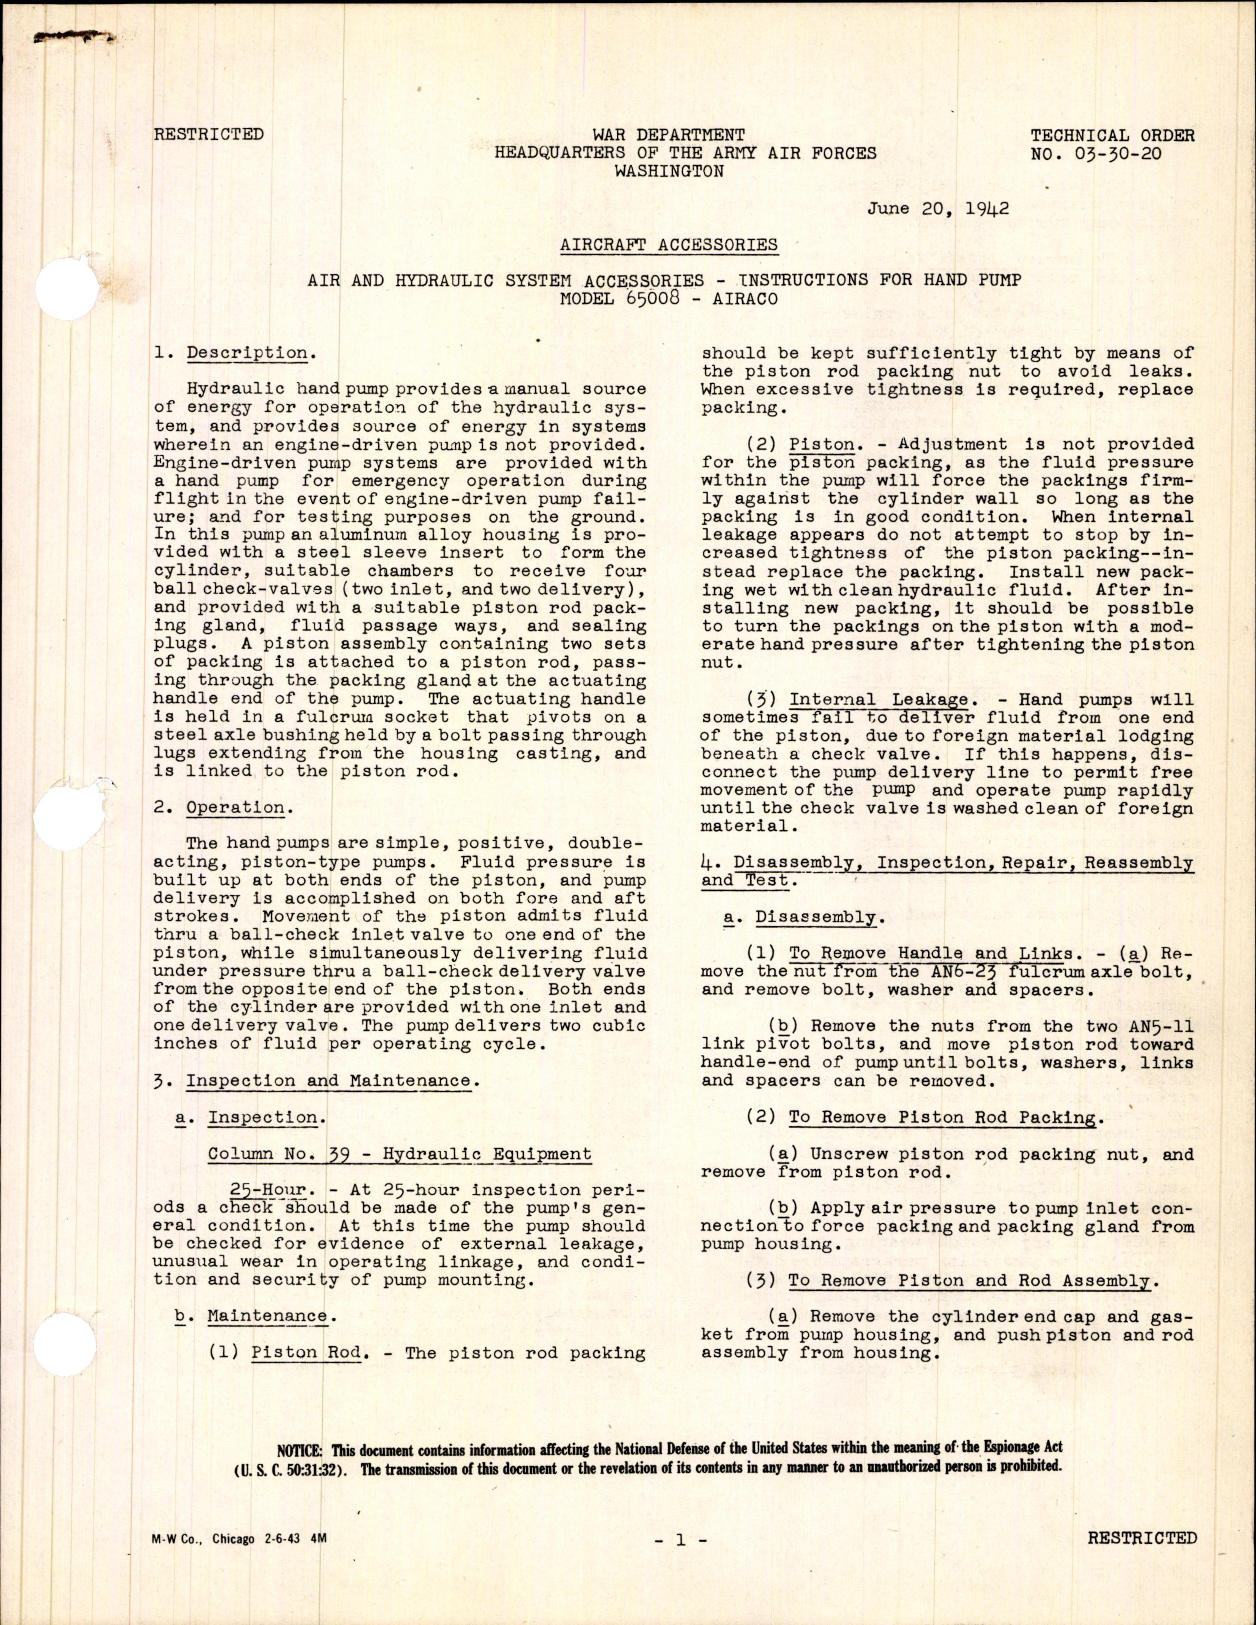 Sample page 1 from AirCorps Library document: Instructions for Hand Pump Model 65008 